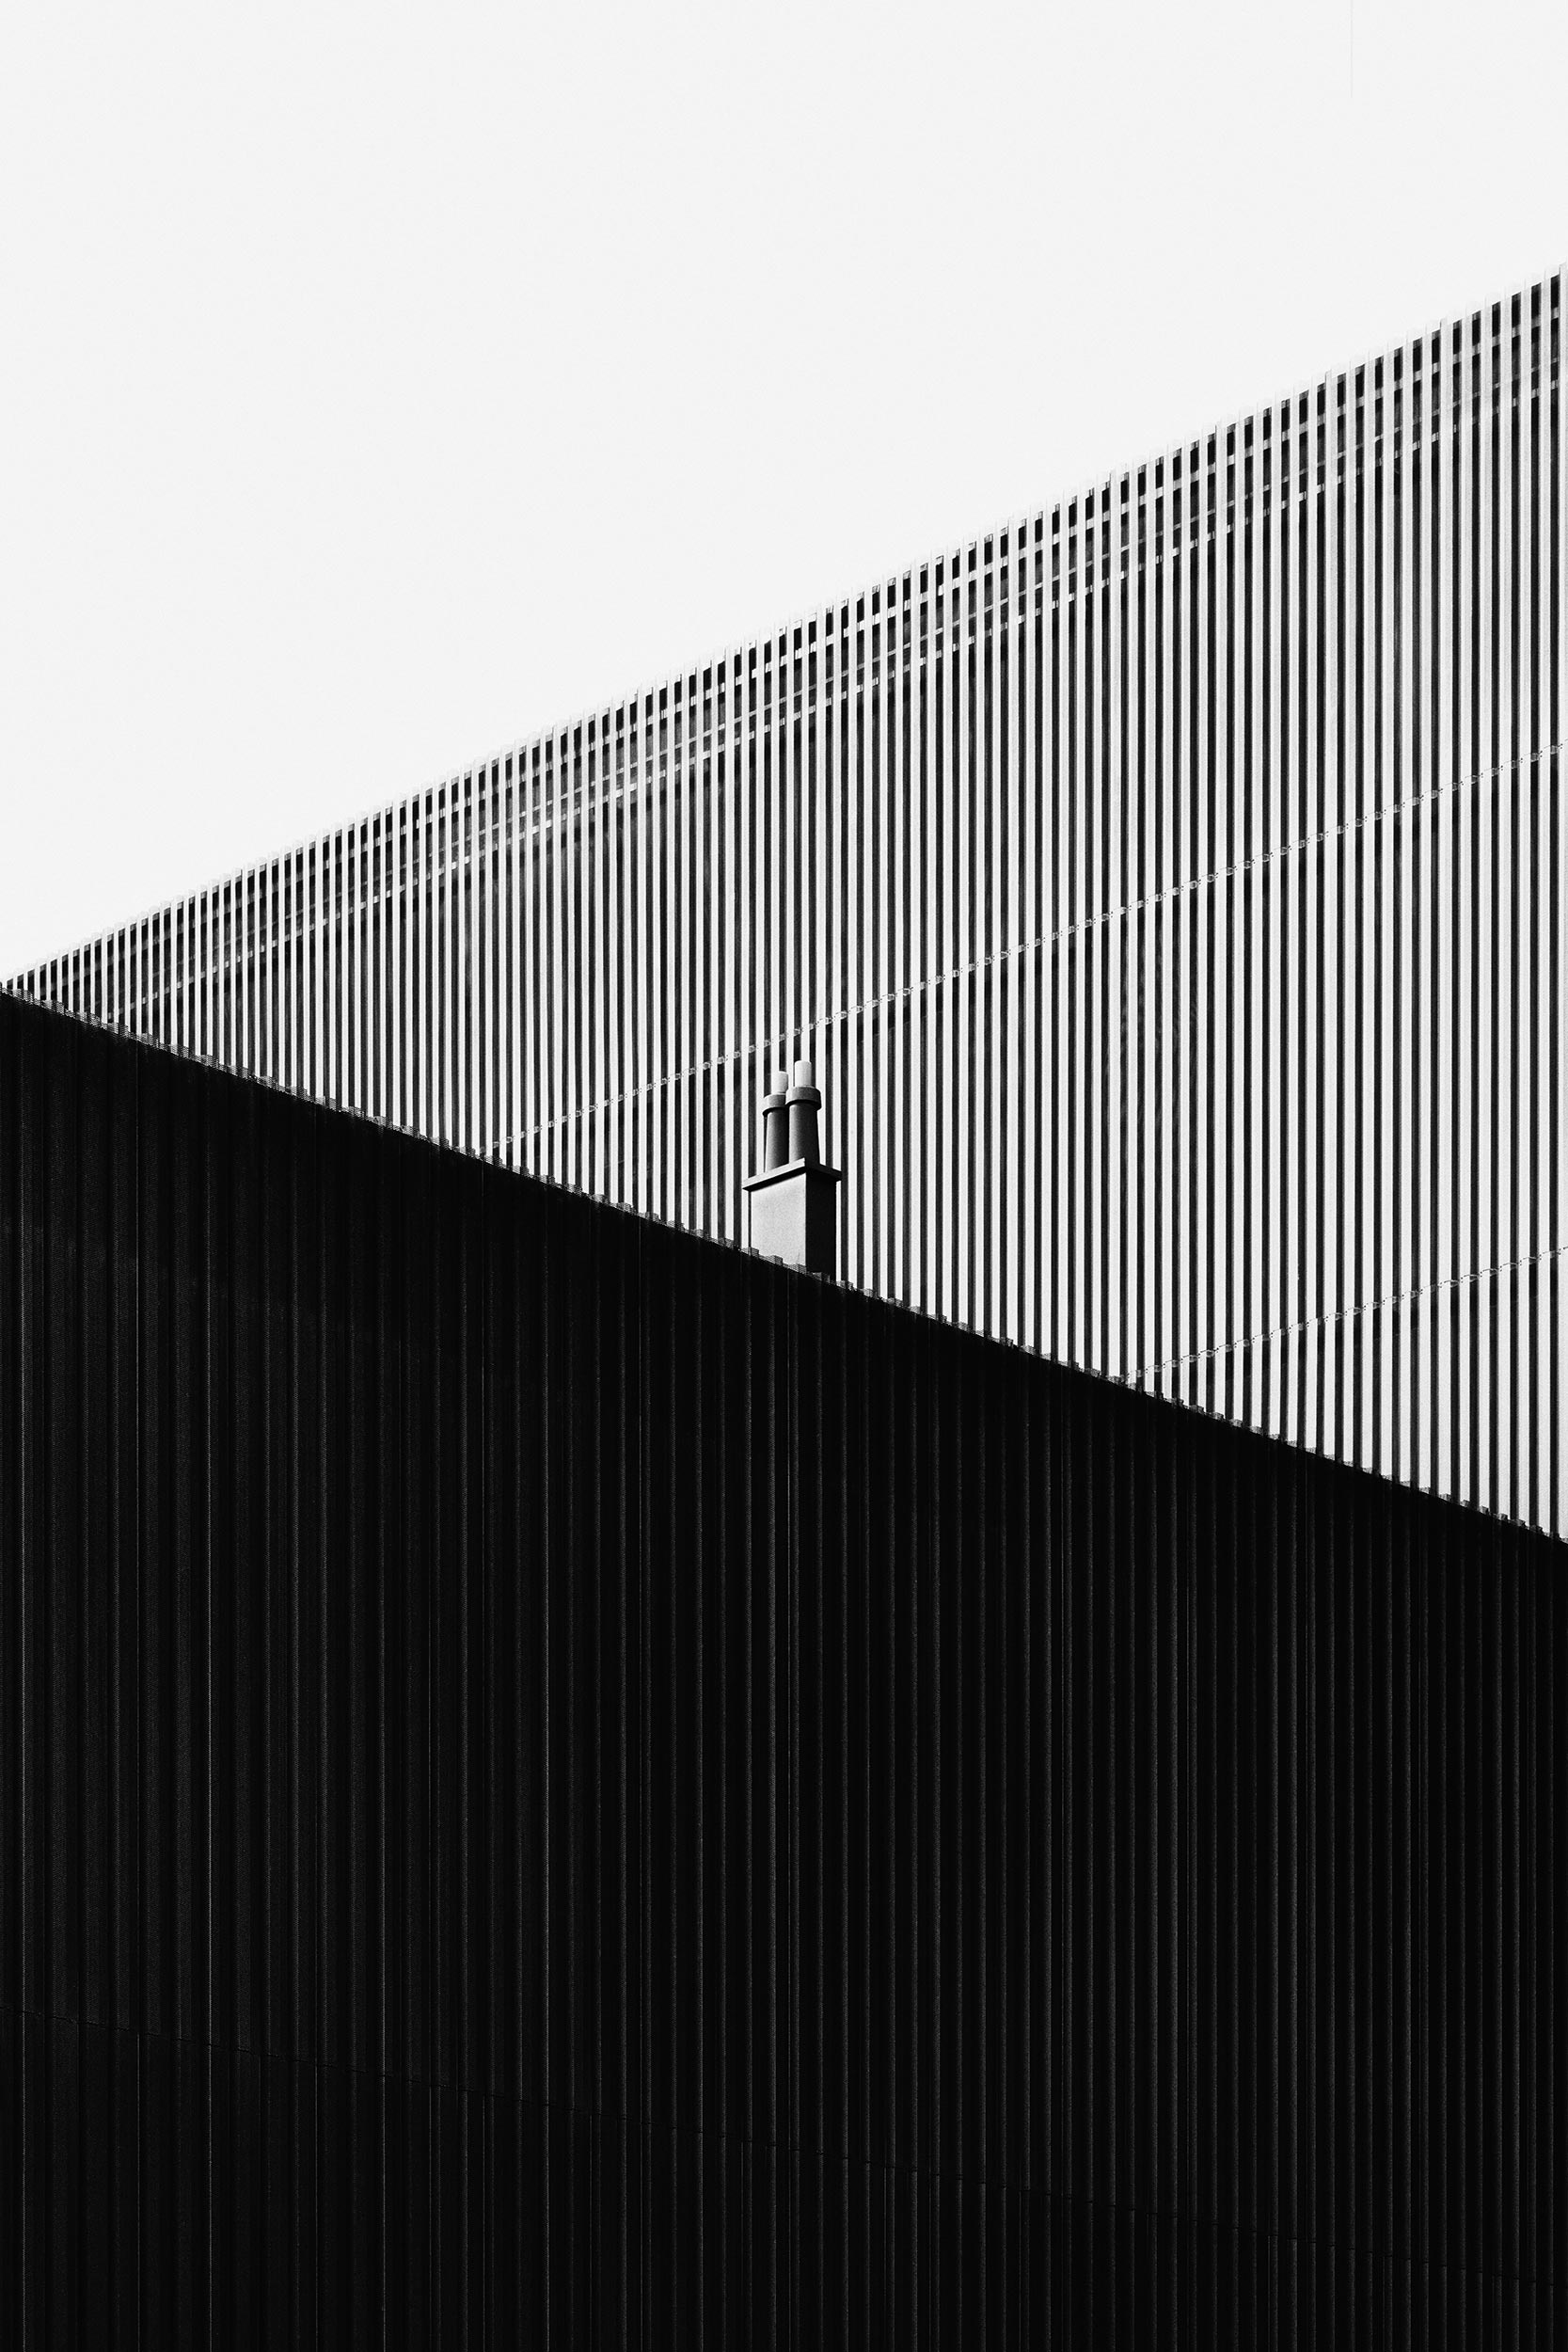 Exhibition Hall A, Innsbruck, Architecture Photography, Black & White